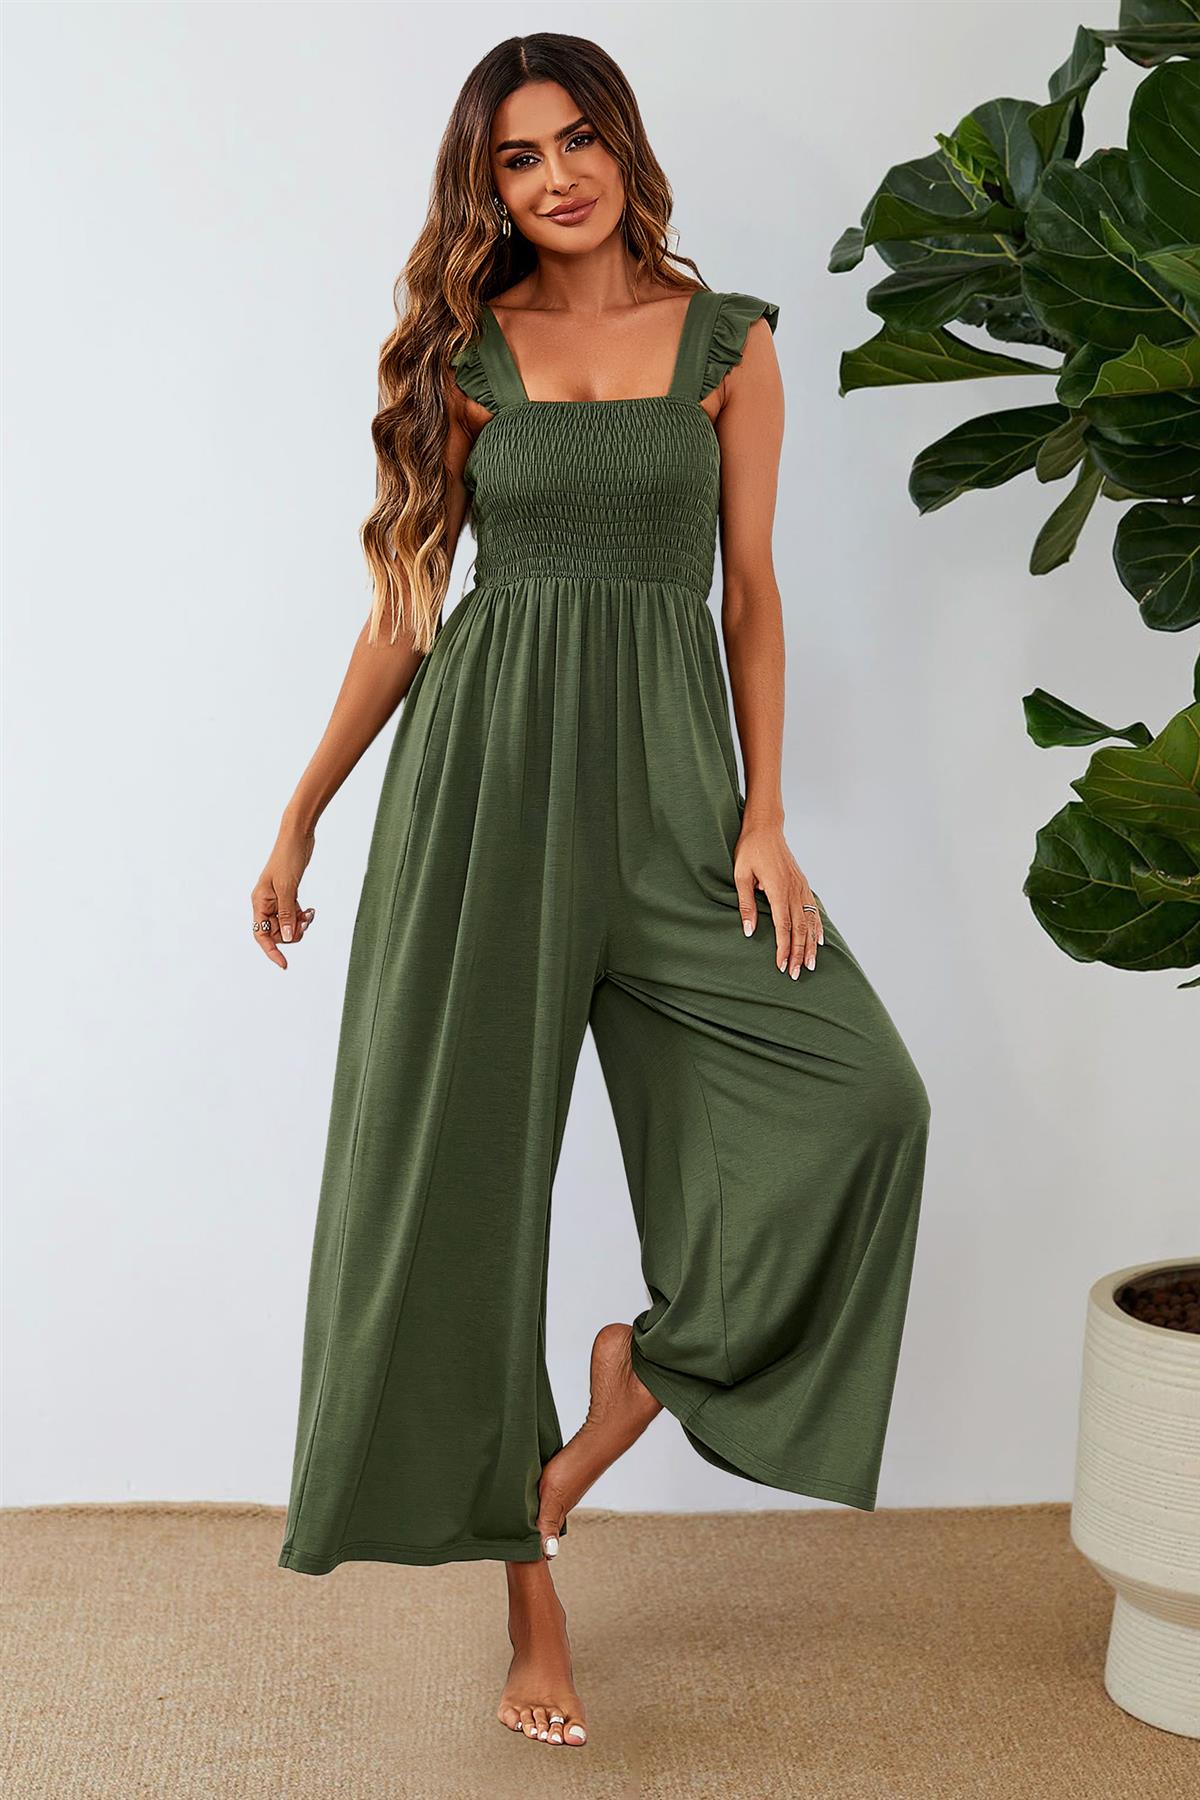 Frill Detail Strappy Jumpsuit In Olive FS579-Olive